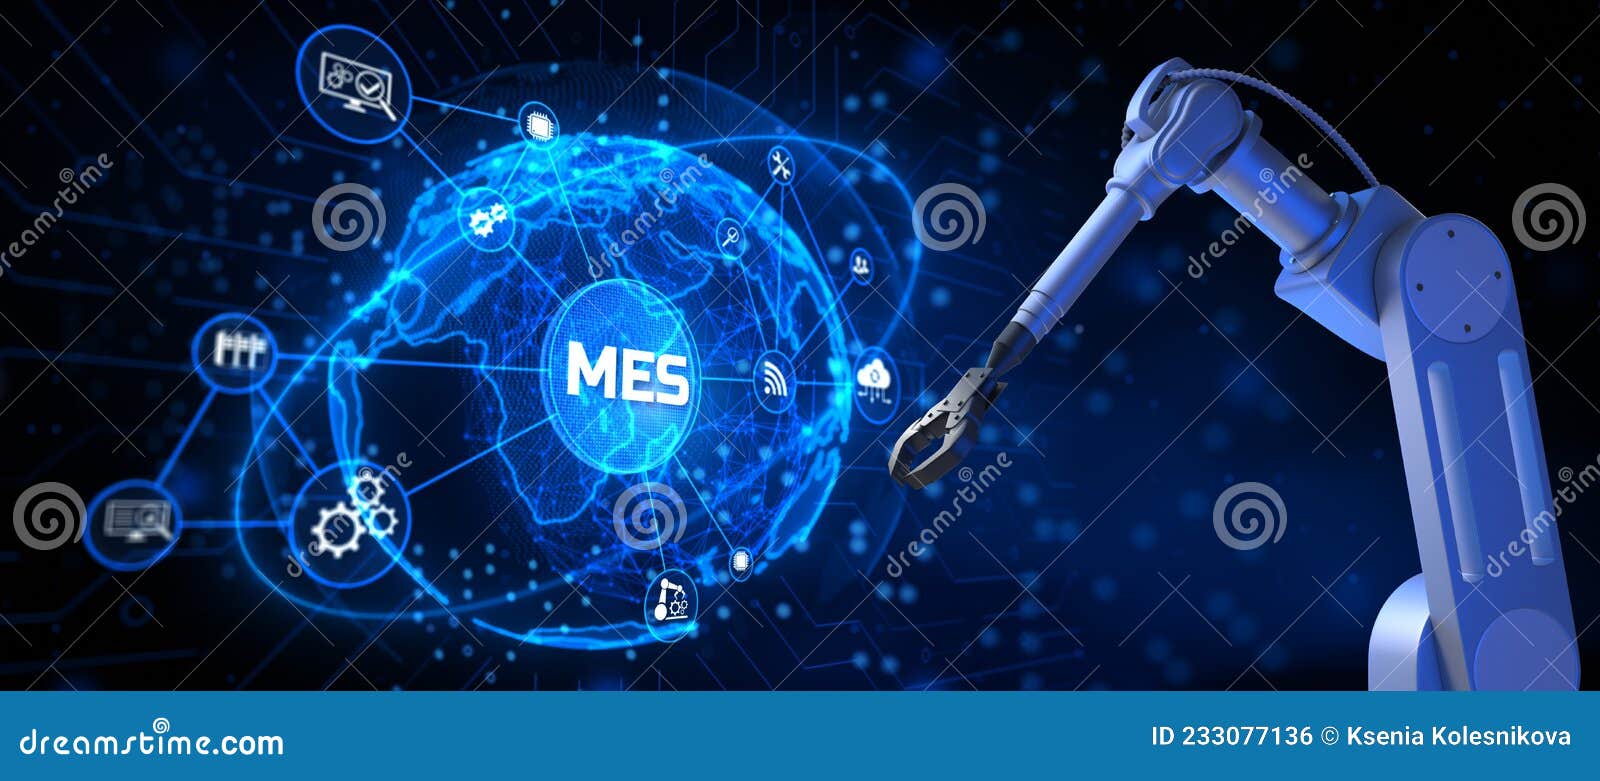 mes manufacturing execution system. business industrial technology concept. cobot 3d render